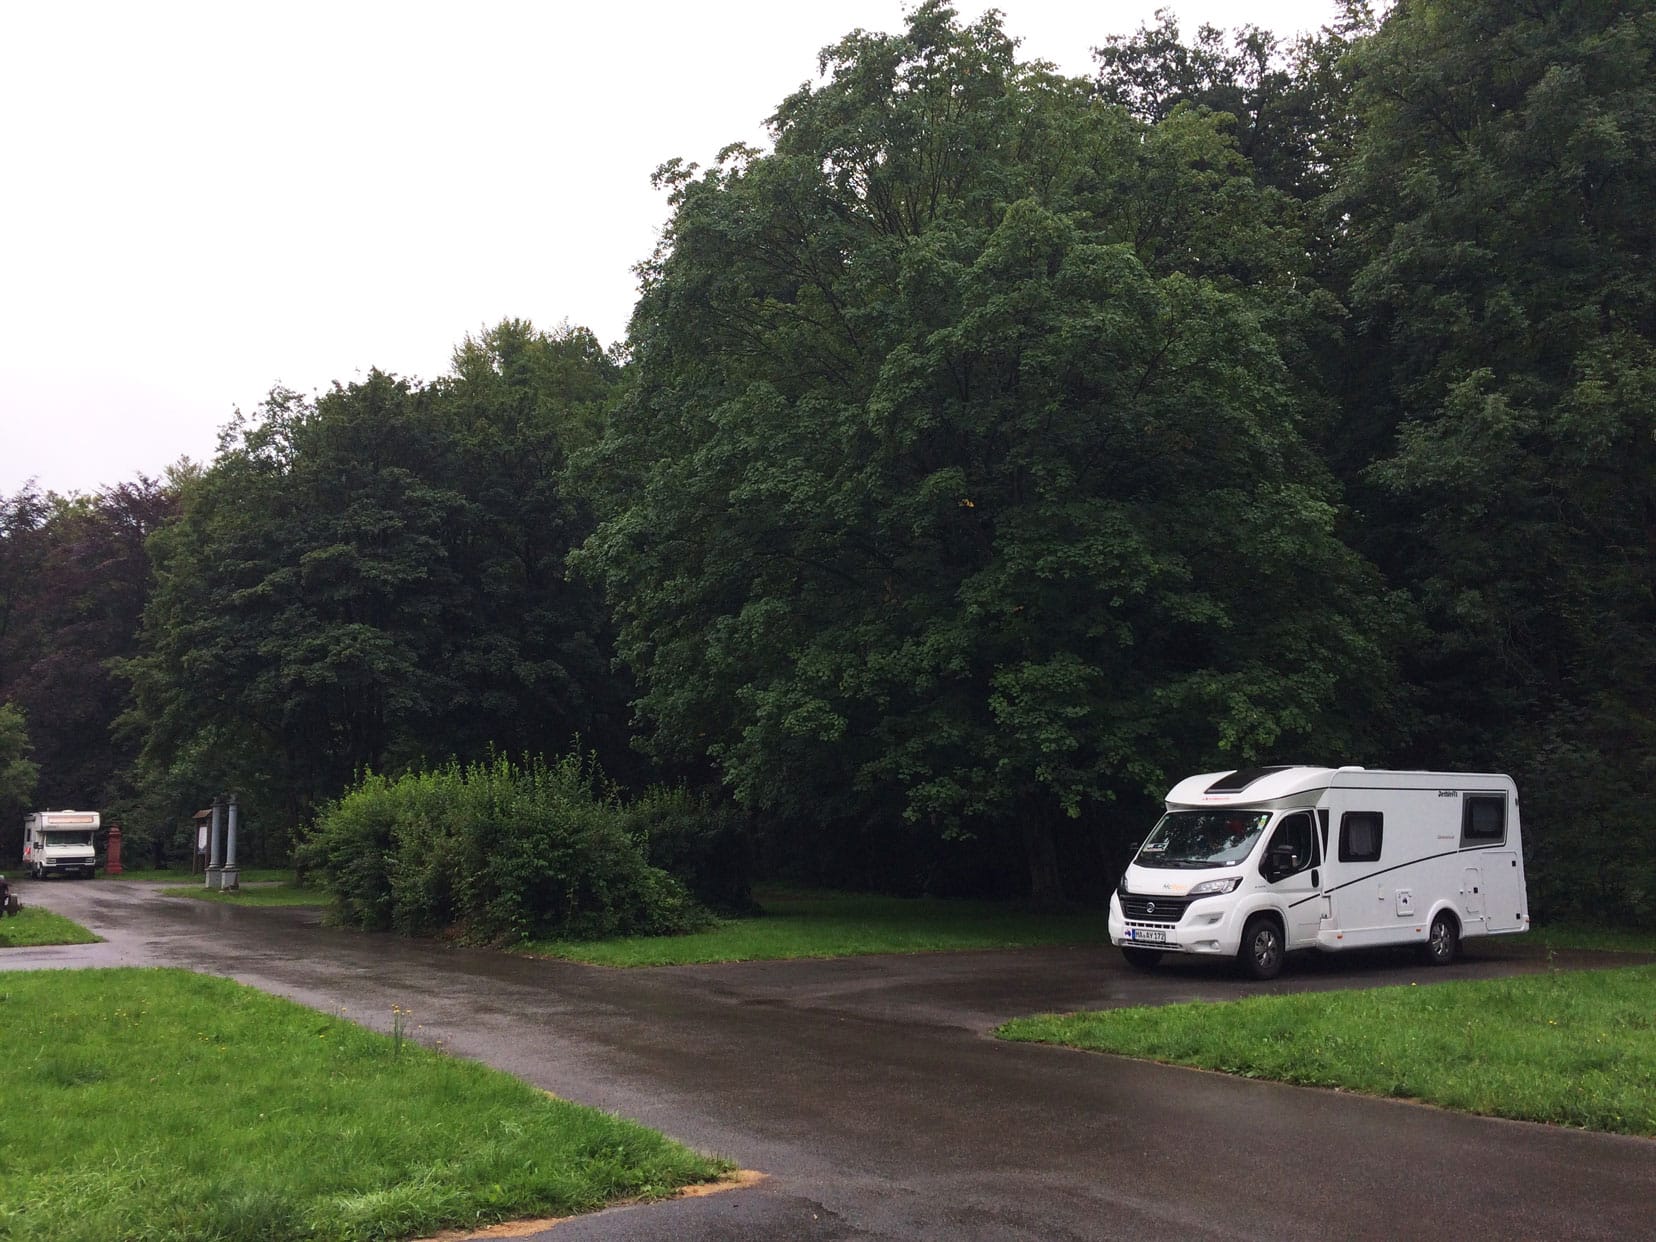 Our Motorhome parked amongst trees in a campsite 